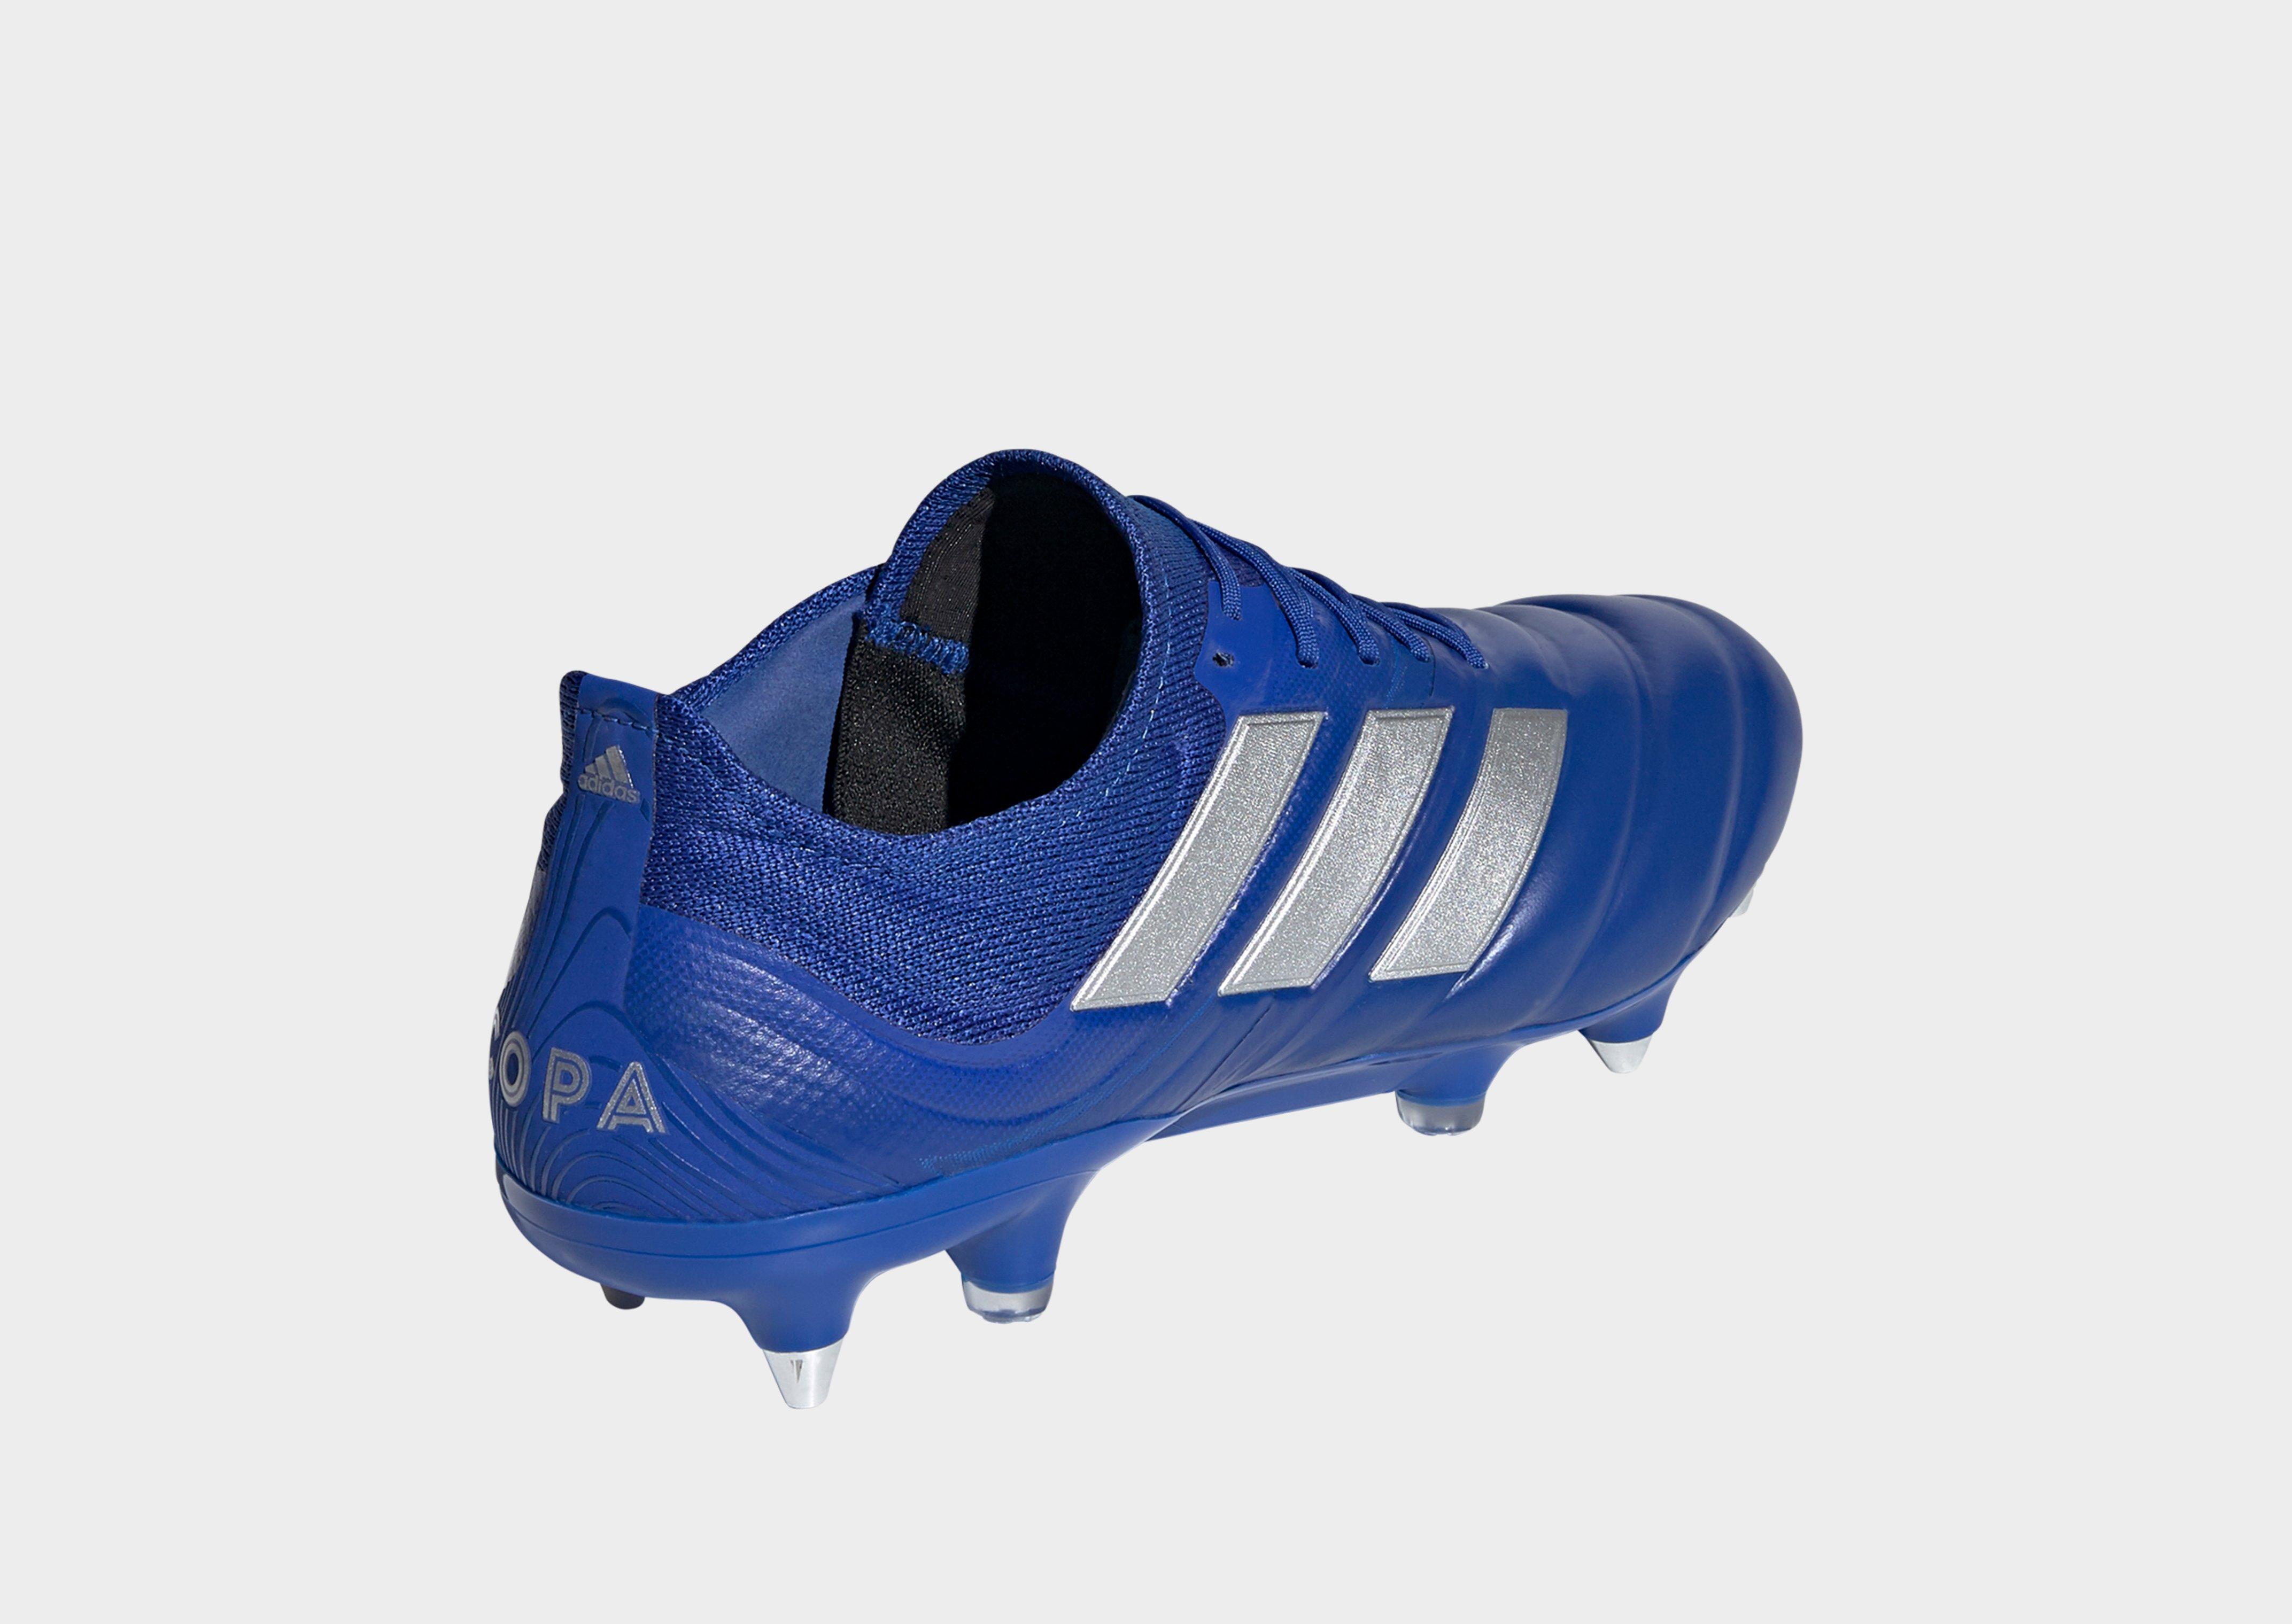 copa soft ground boots